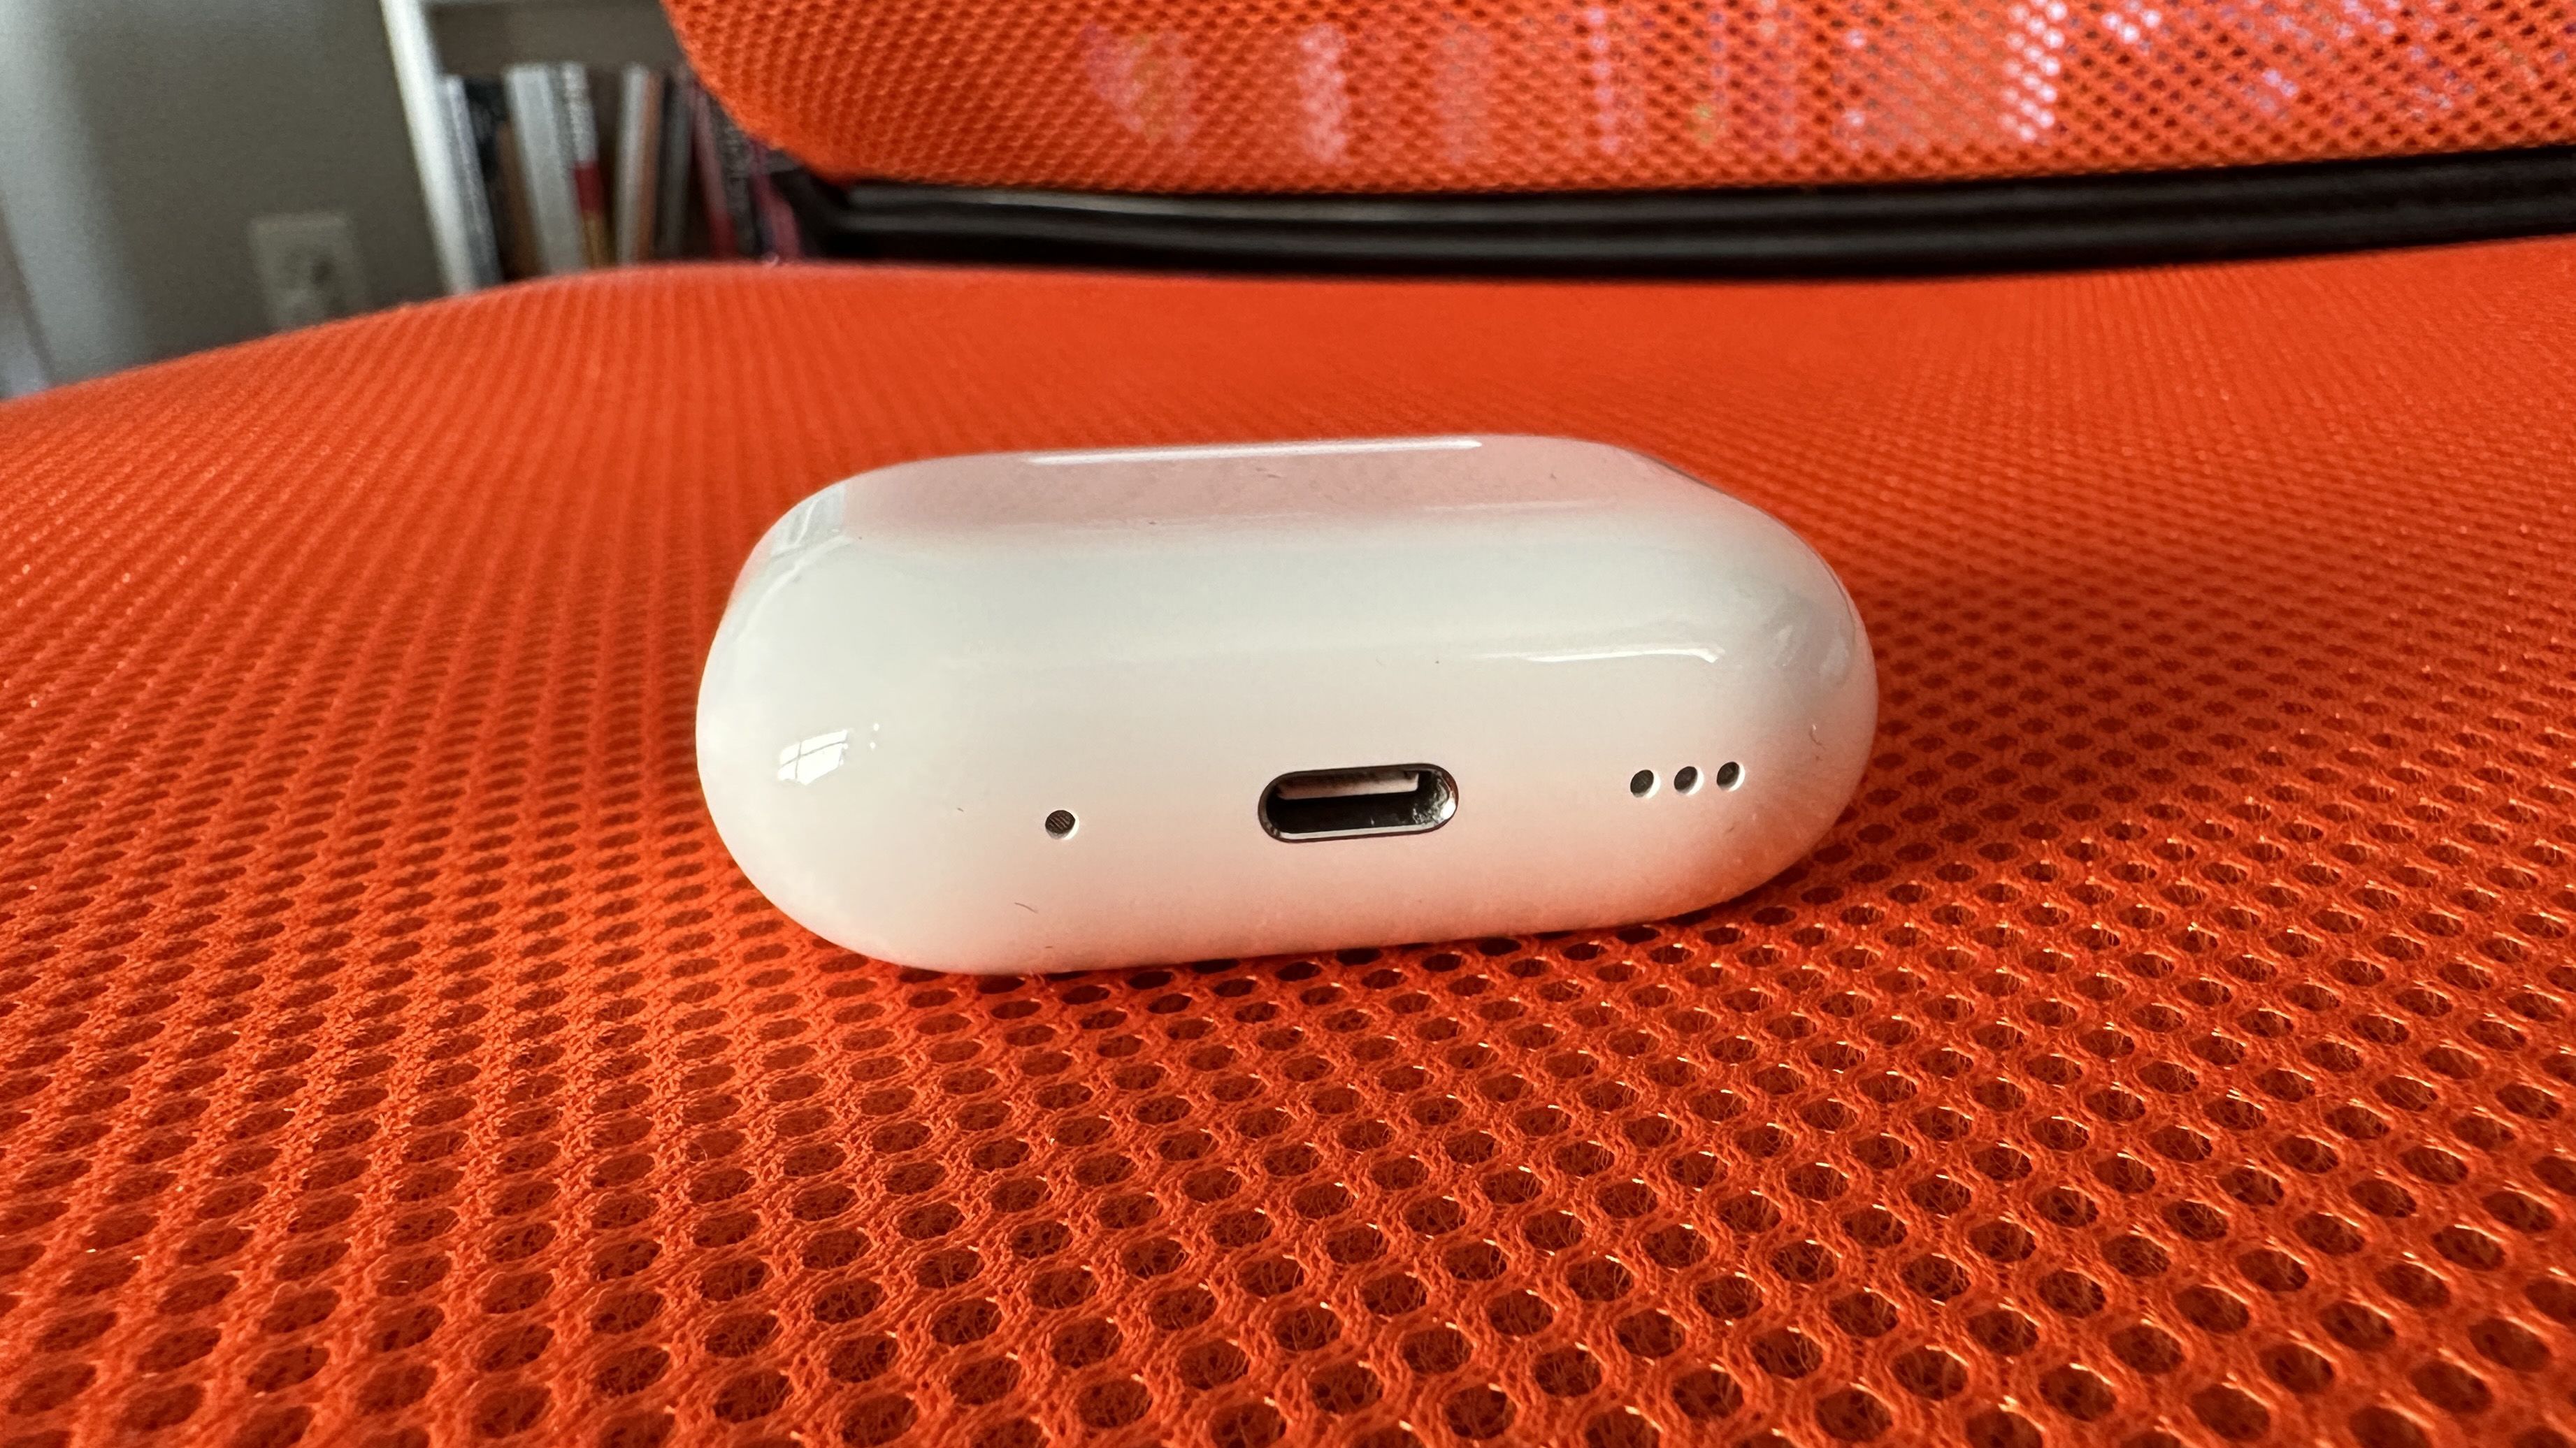 The next AirPods Pro update might be a USB-C charging case